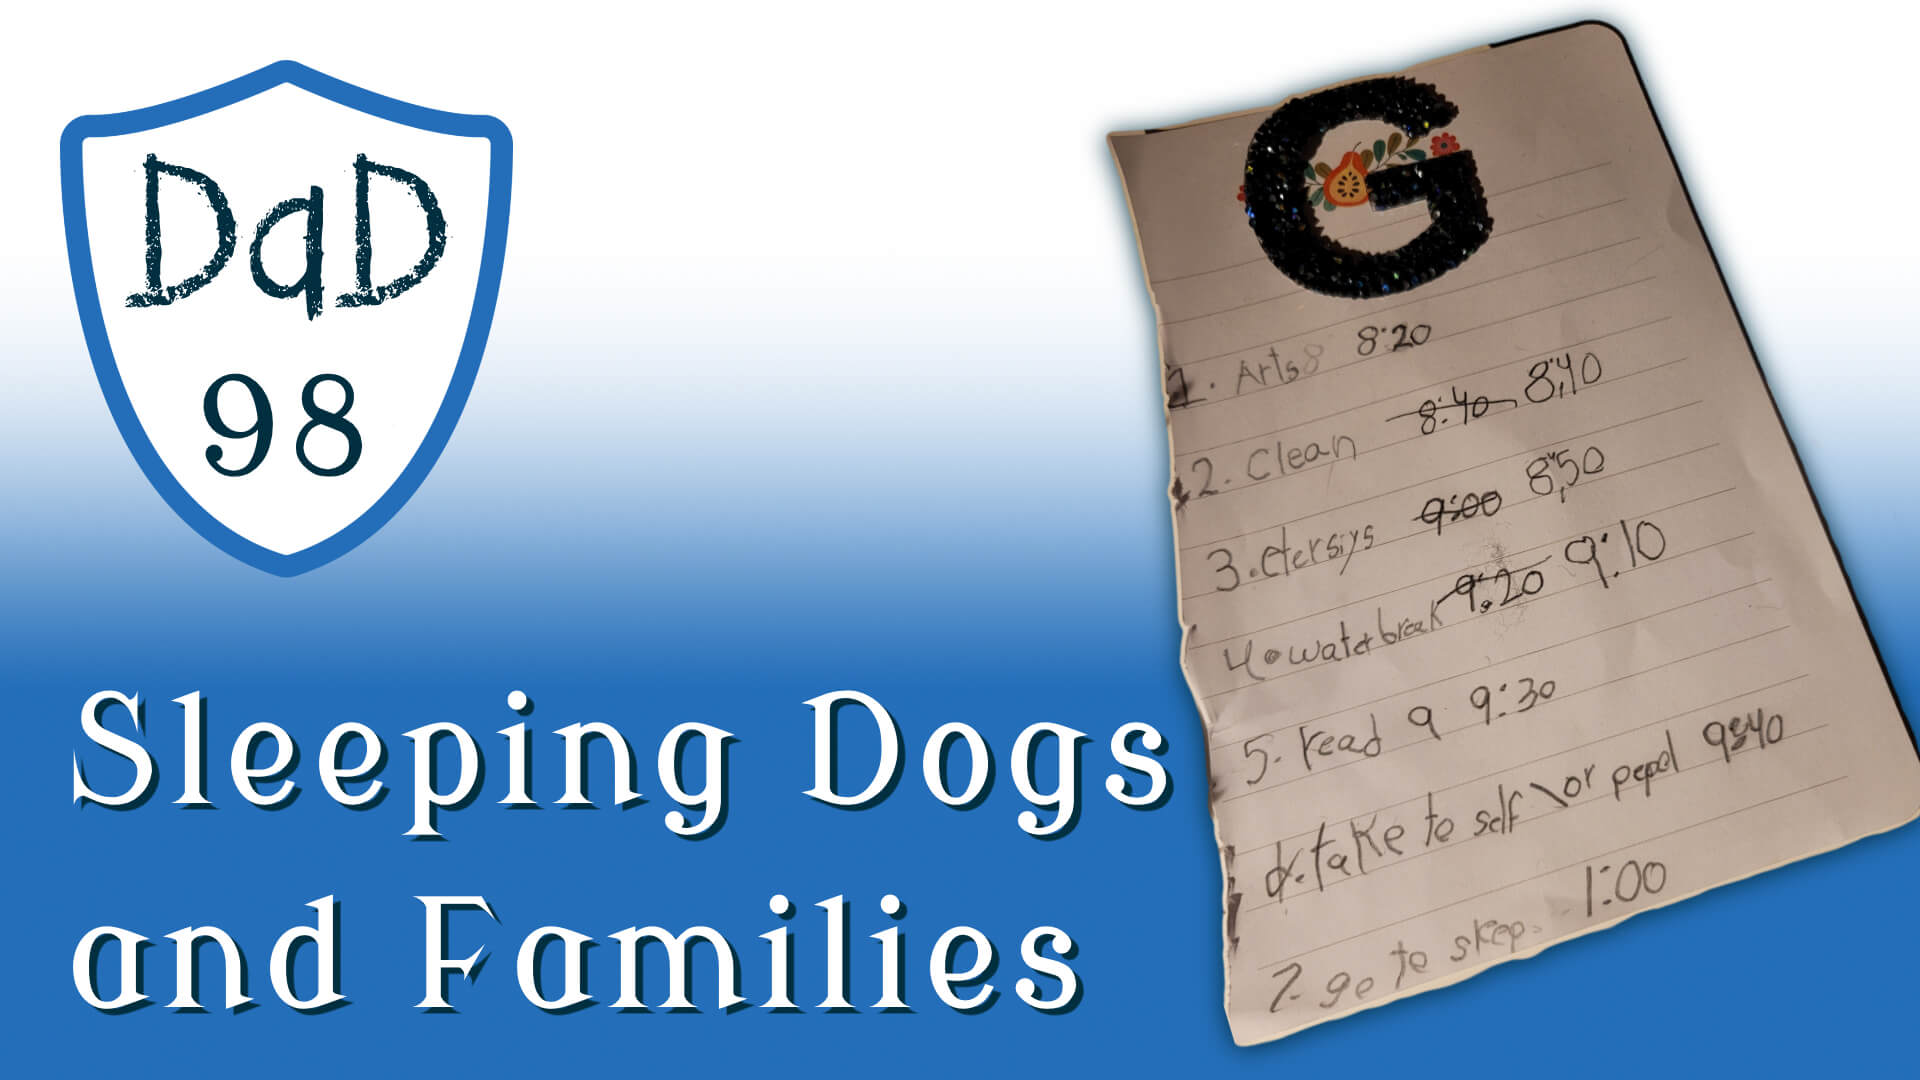 DaD 98 - Sleeping Dogs and Families